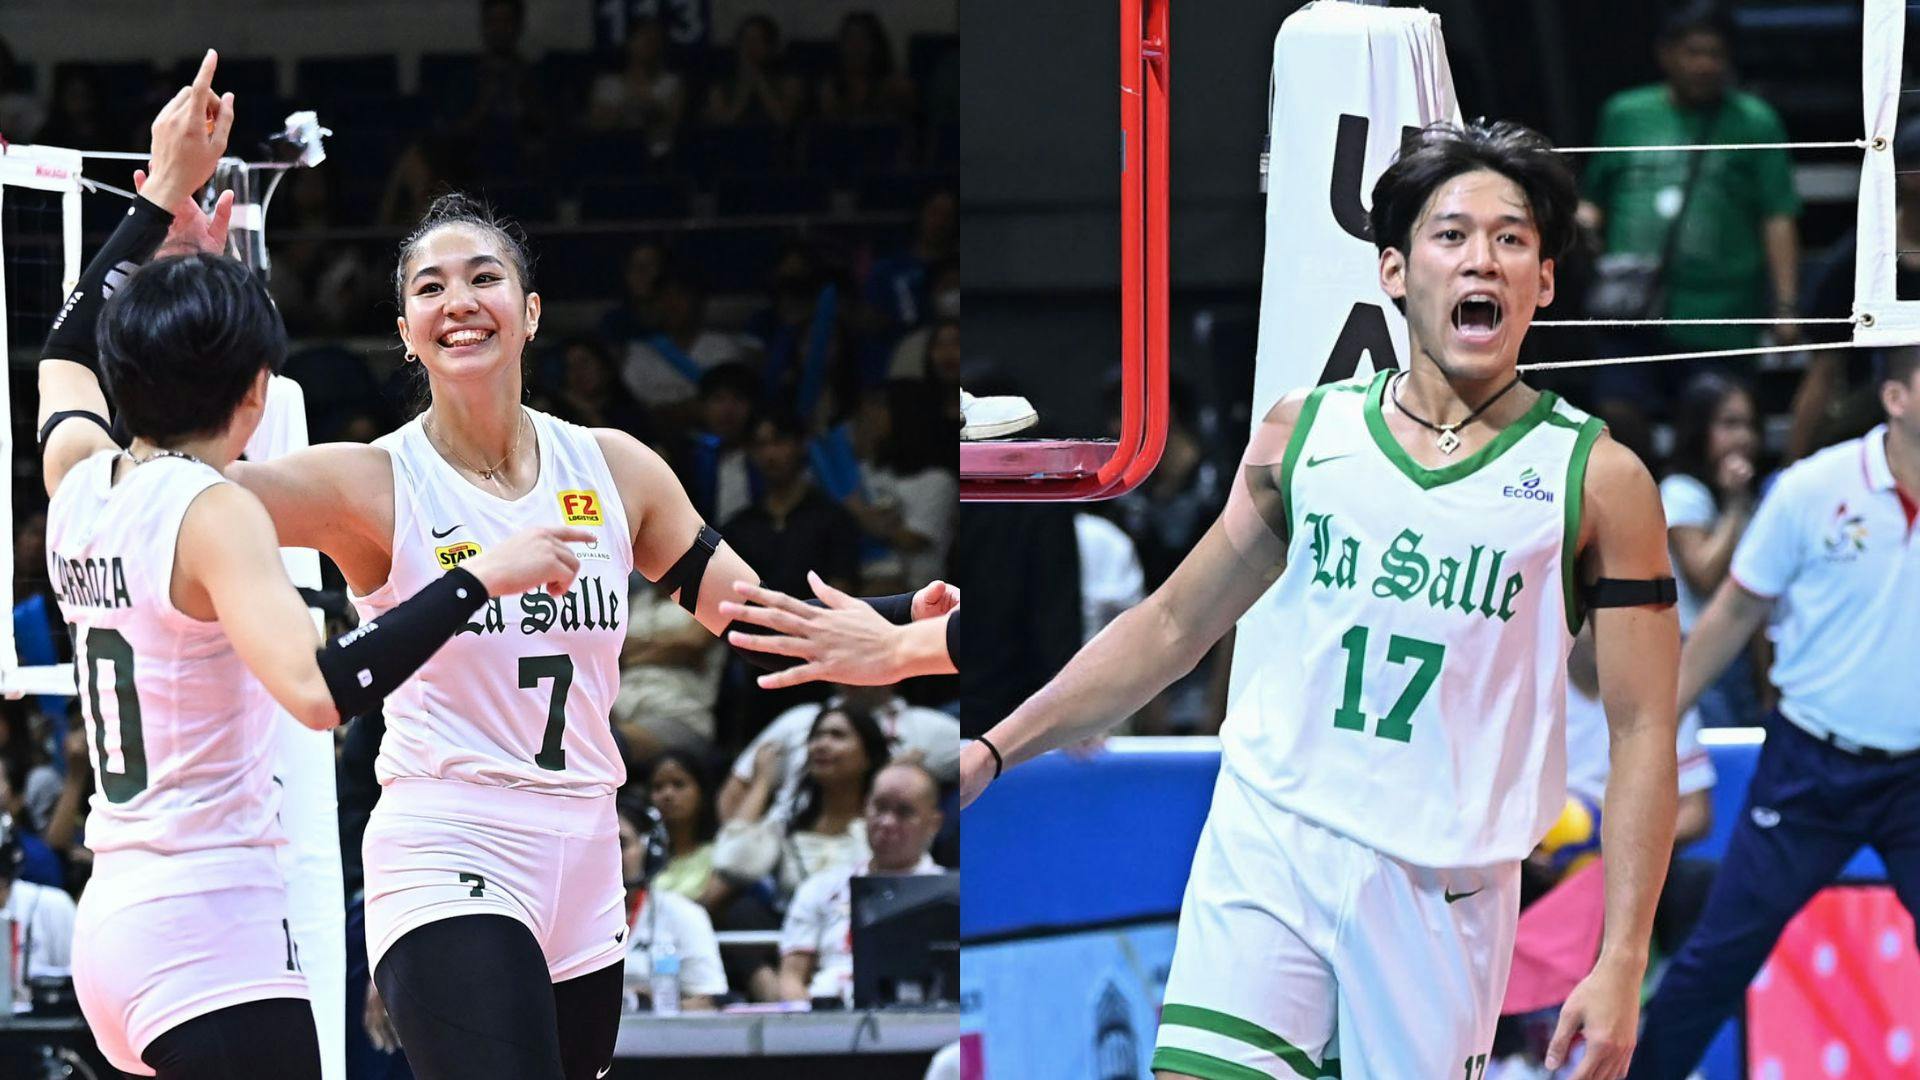 Archers ready: DLSU’s Shevana Laput, Vince Maglinao bag UAAP Player of the Week honors after undefeated week 